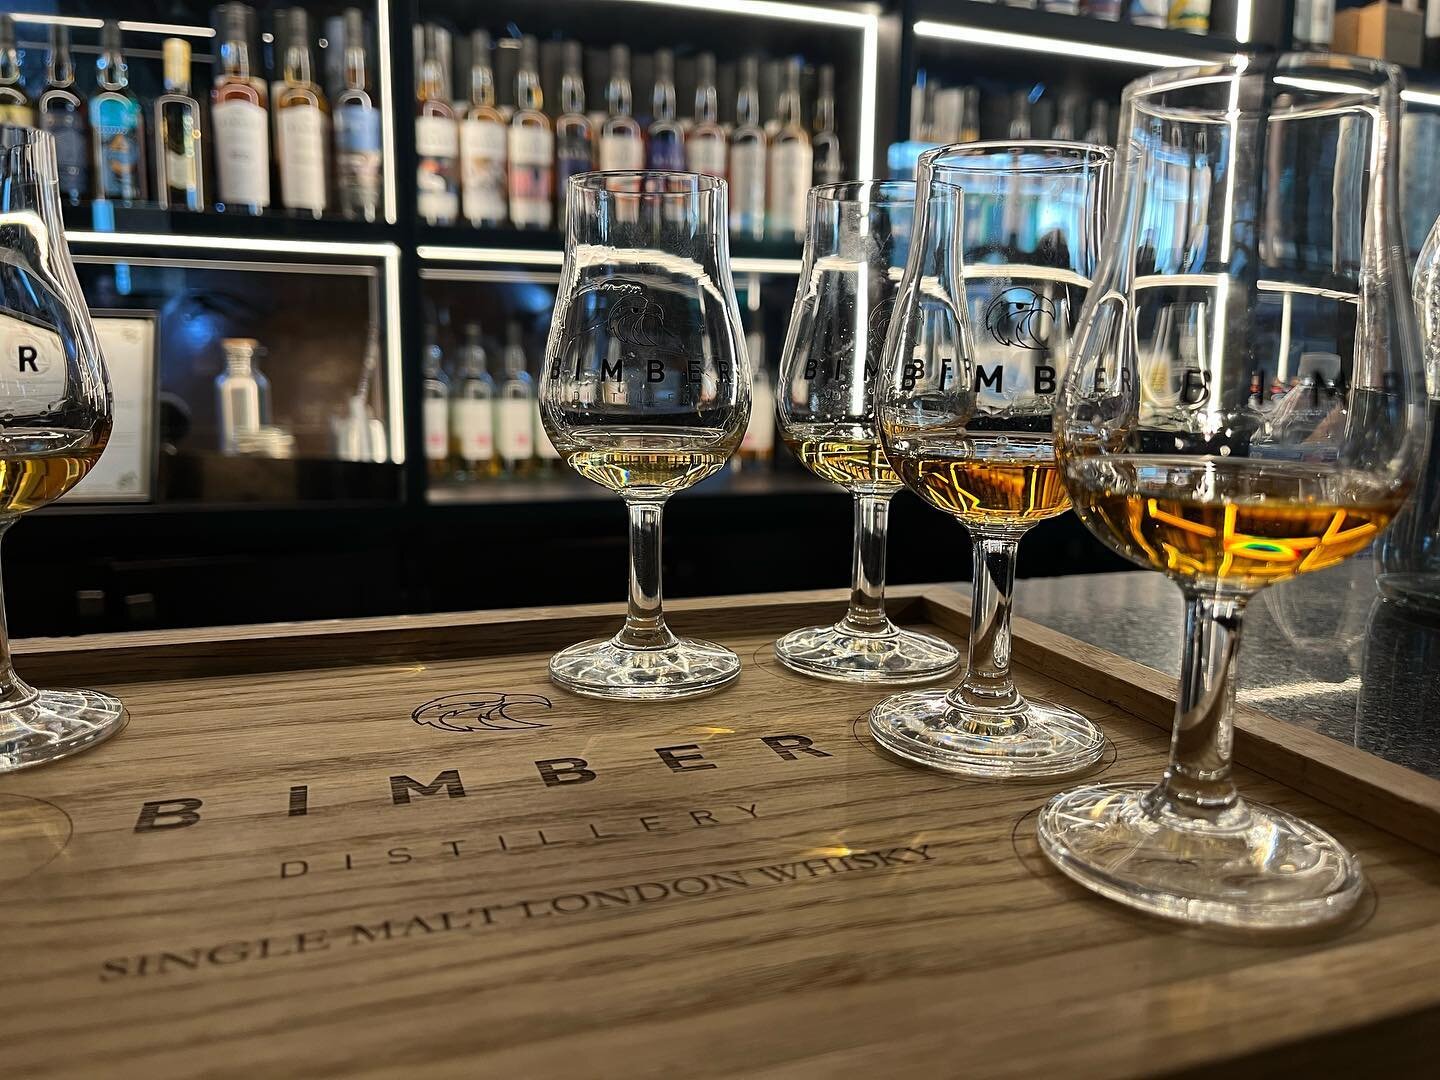 An excellent evening tonight at the @bimberdistillery in North Acton. 

#whiskey #whiskeytasting #smalldistillery #london